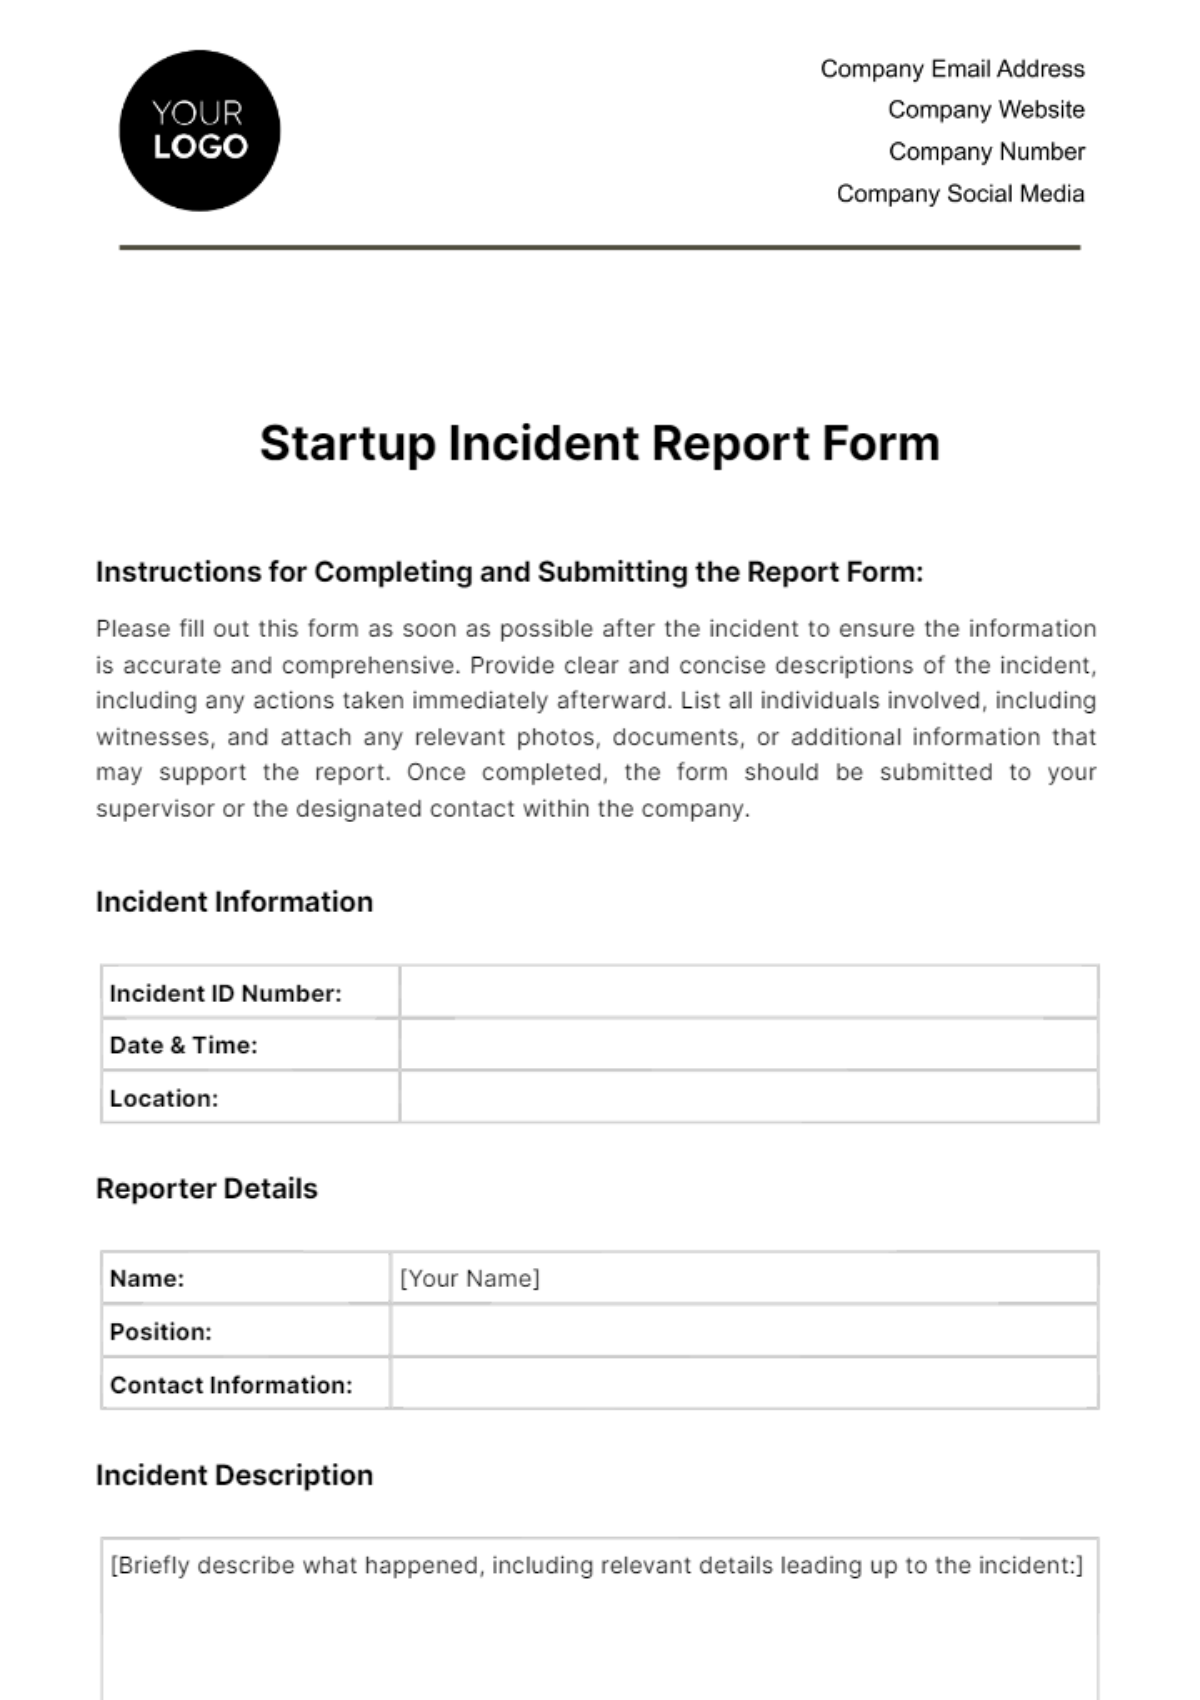 Startup Incident Report Form Template